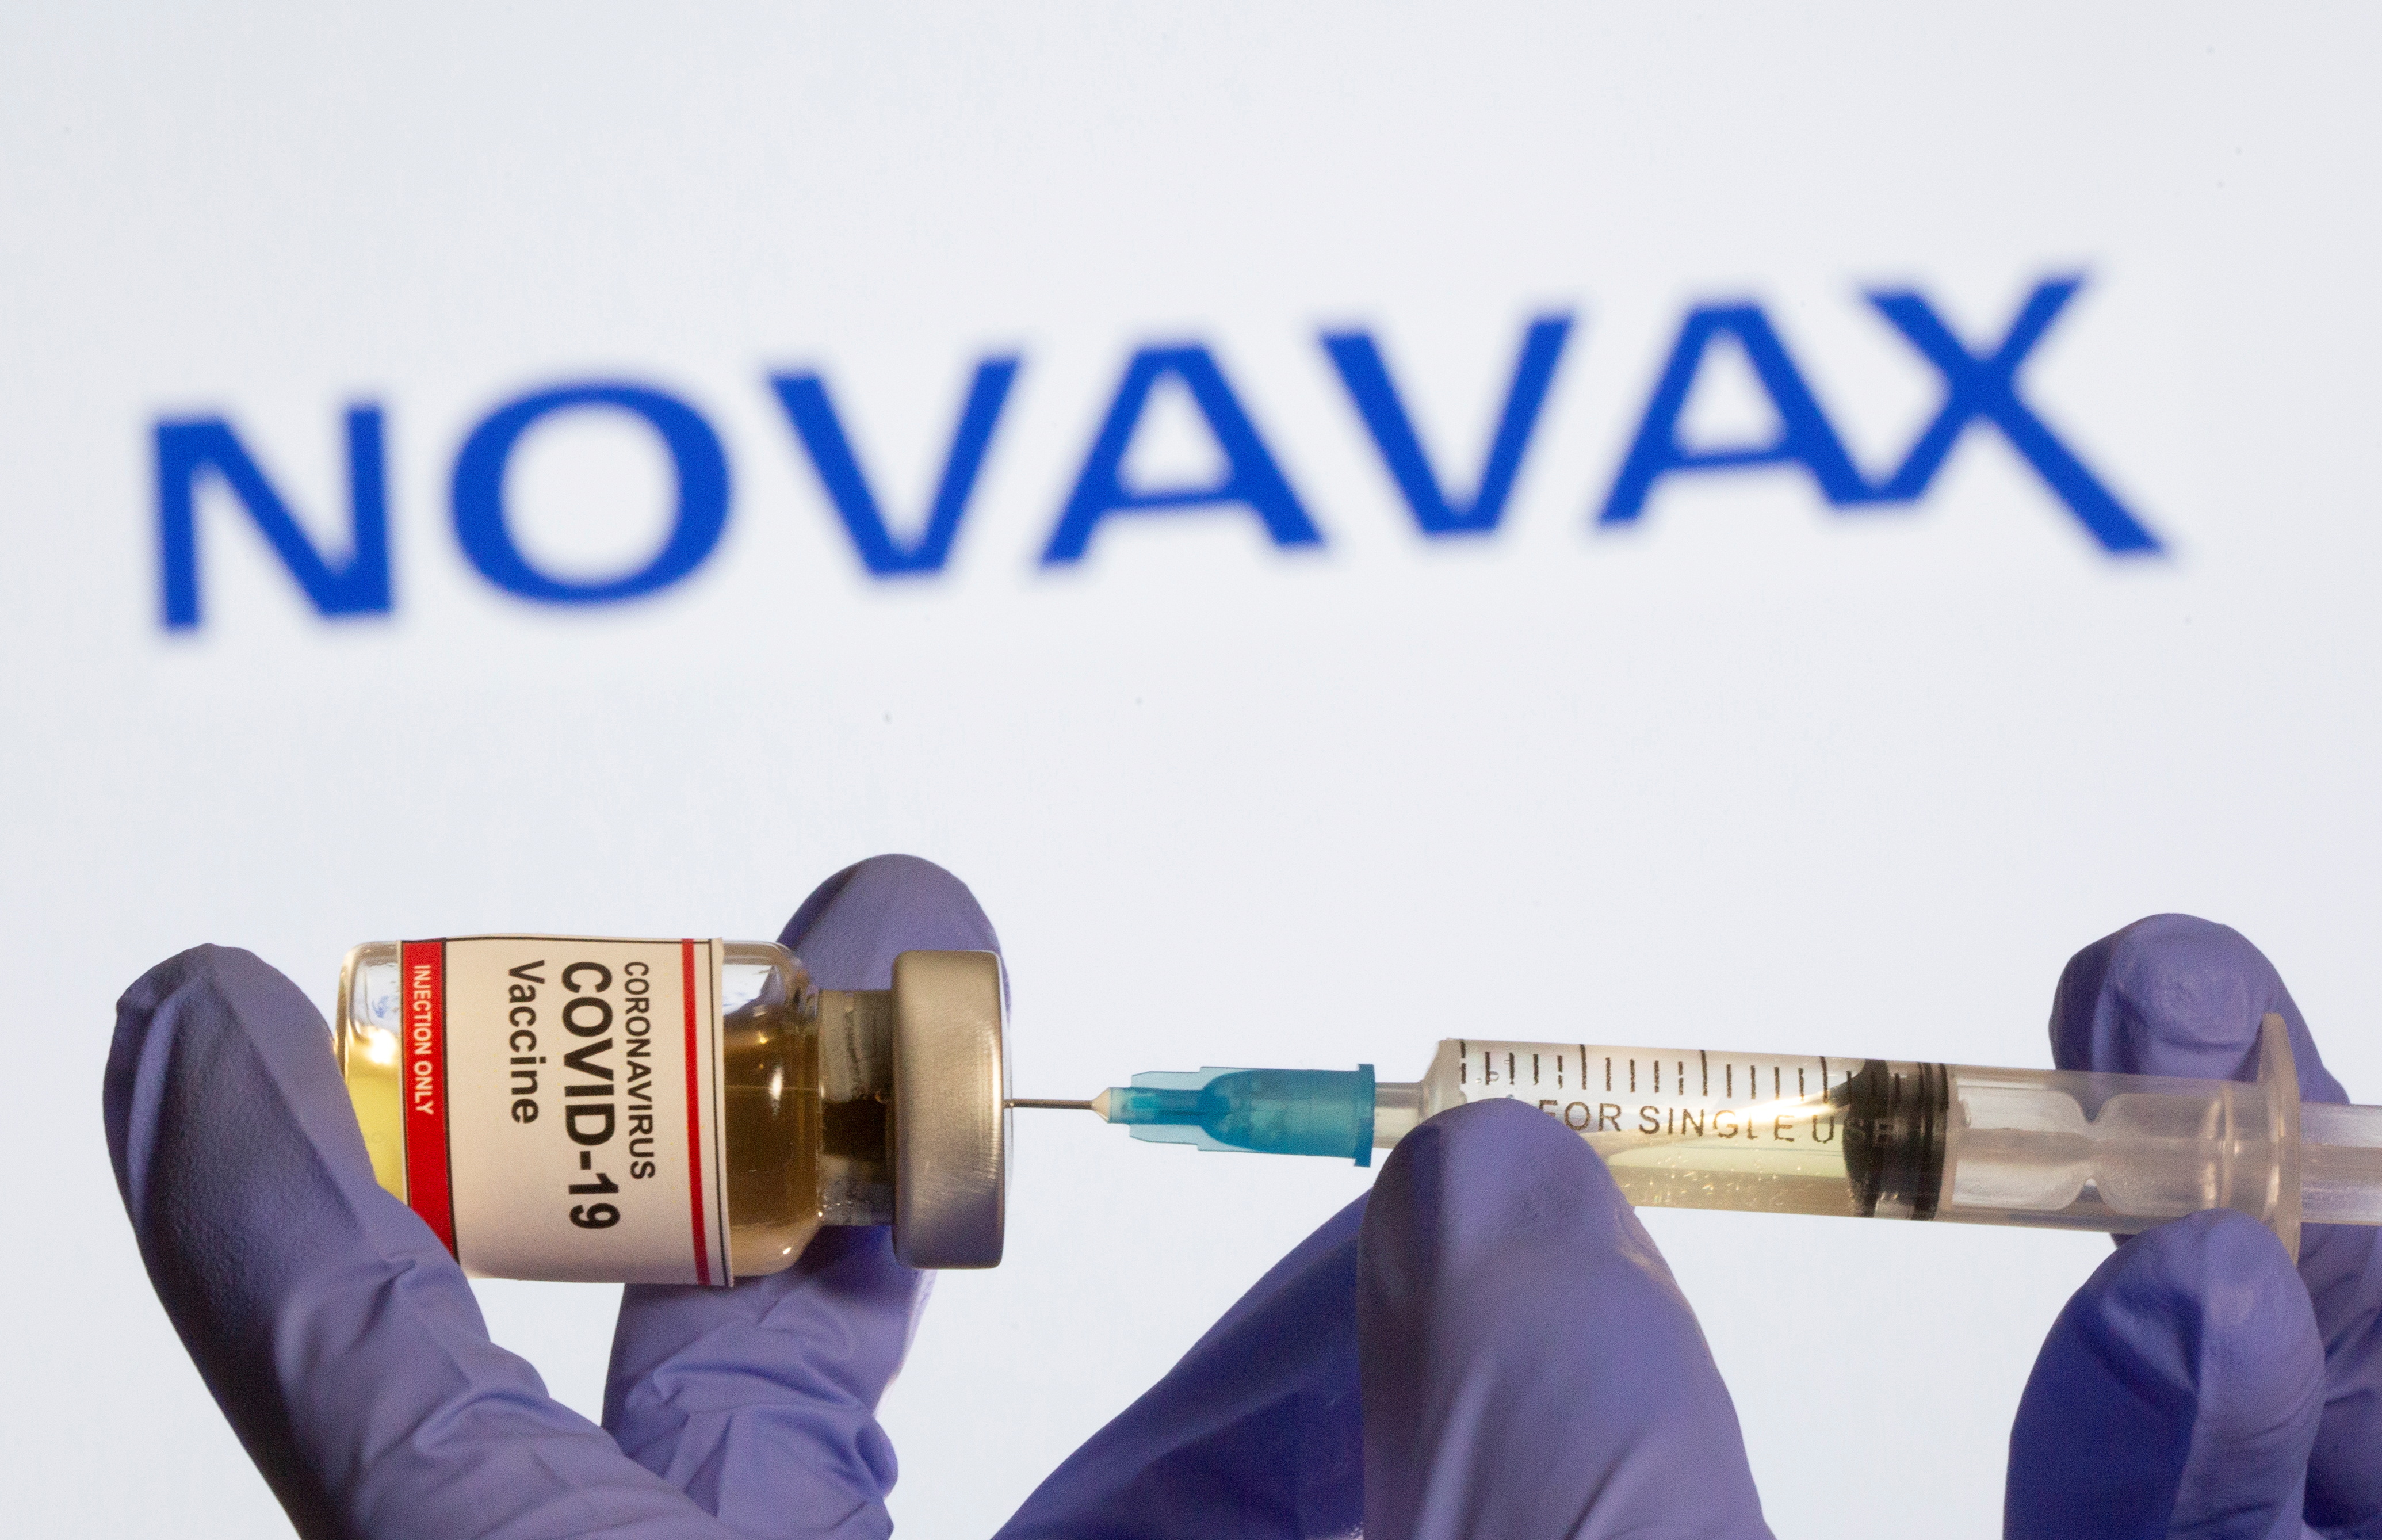 The Serum Institute of India is planning to start clinical trials of Novavax vaccine against Covid-19 for children in July, ANI reported.